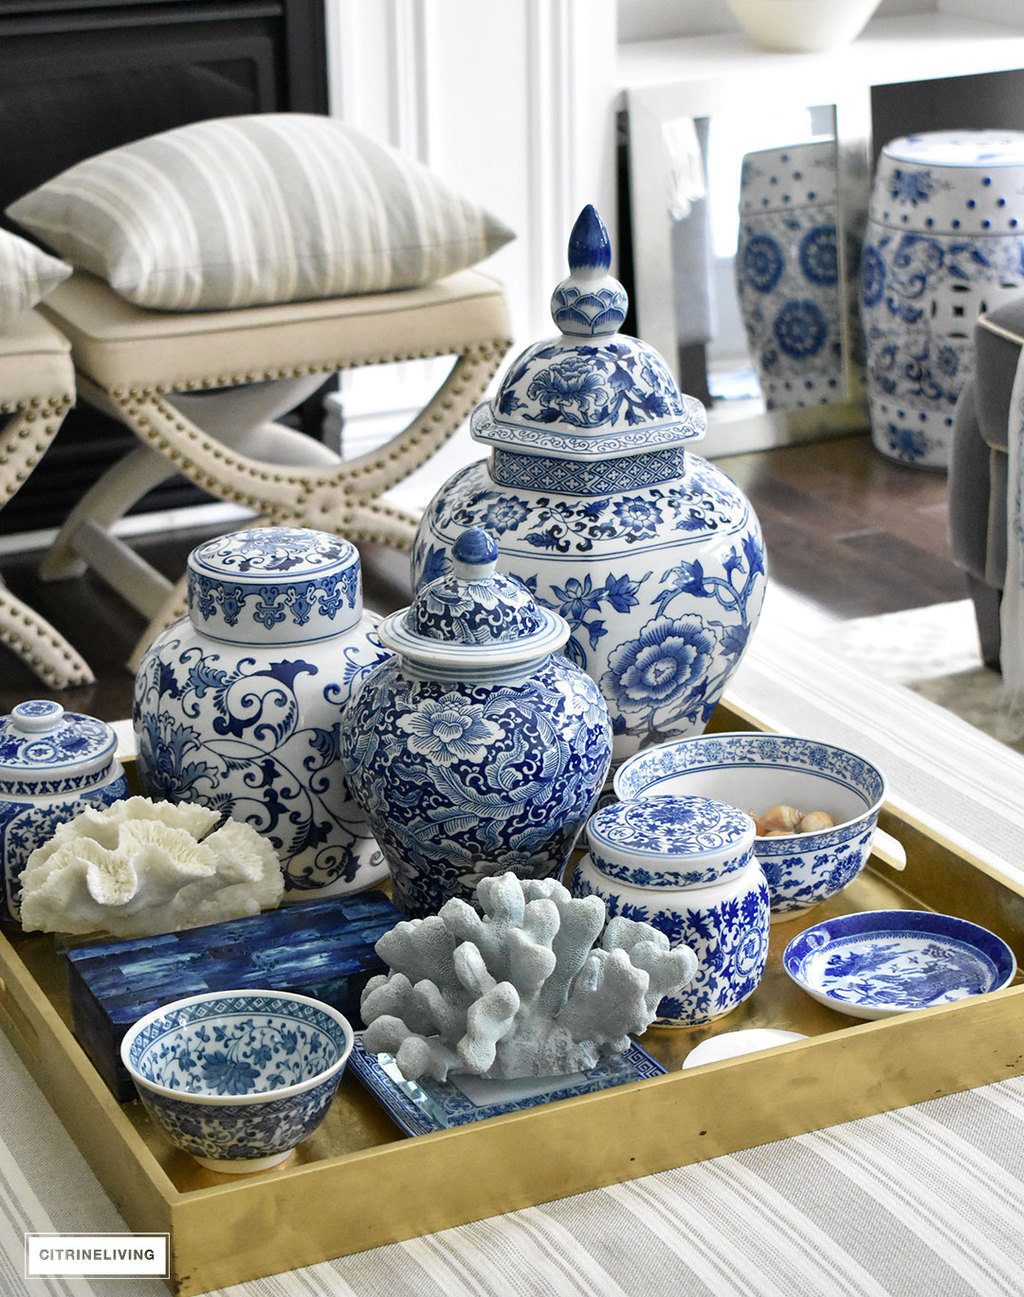 Living room ottoman arranged with blue and white ginger jars, vases and bowls on a gold tray